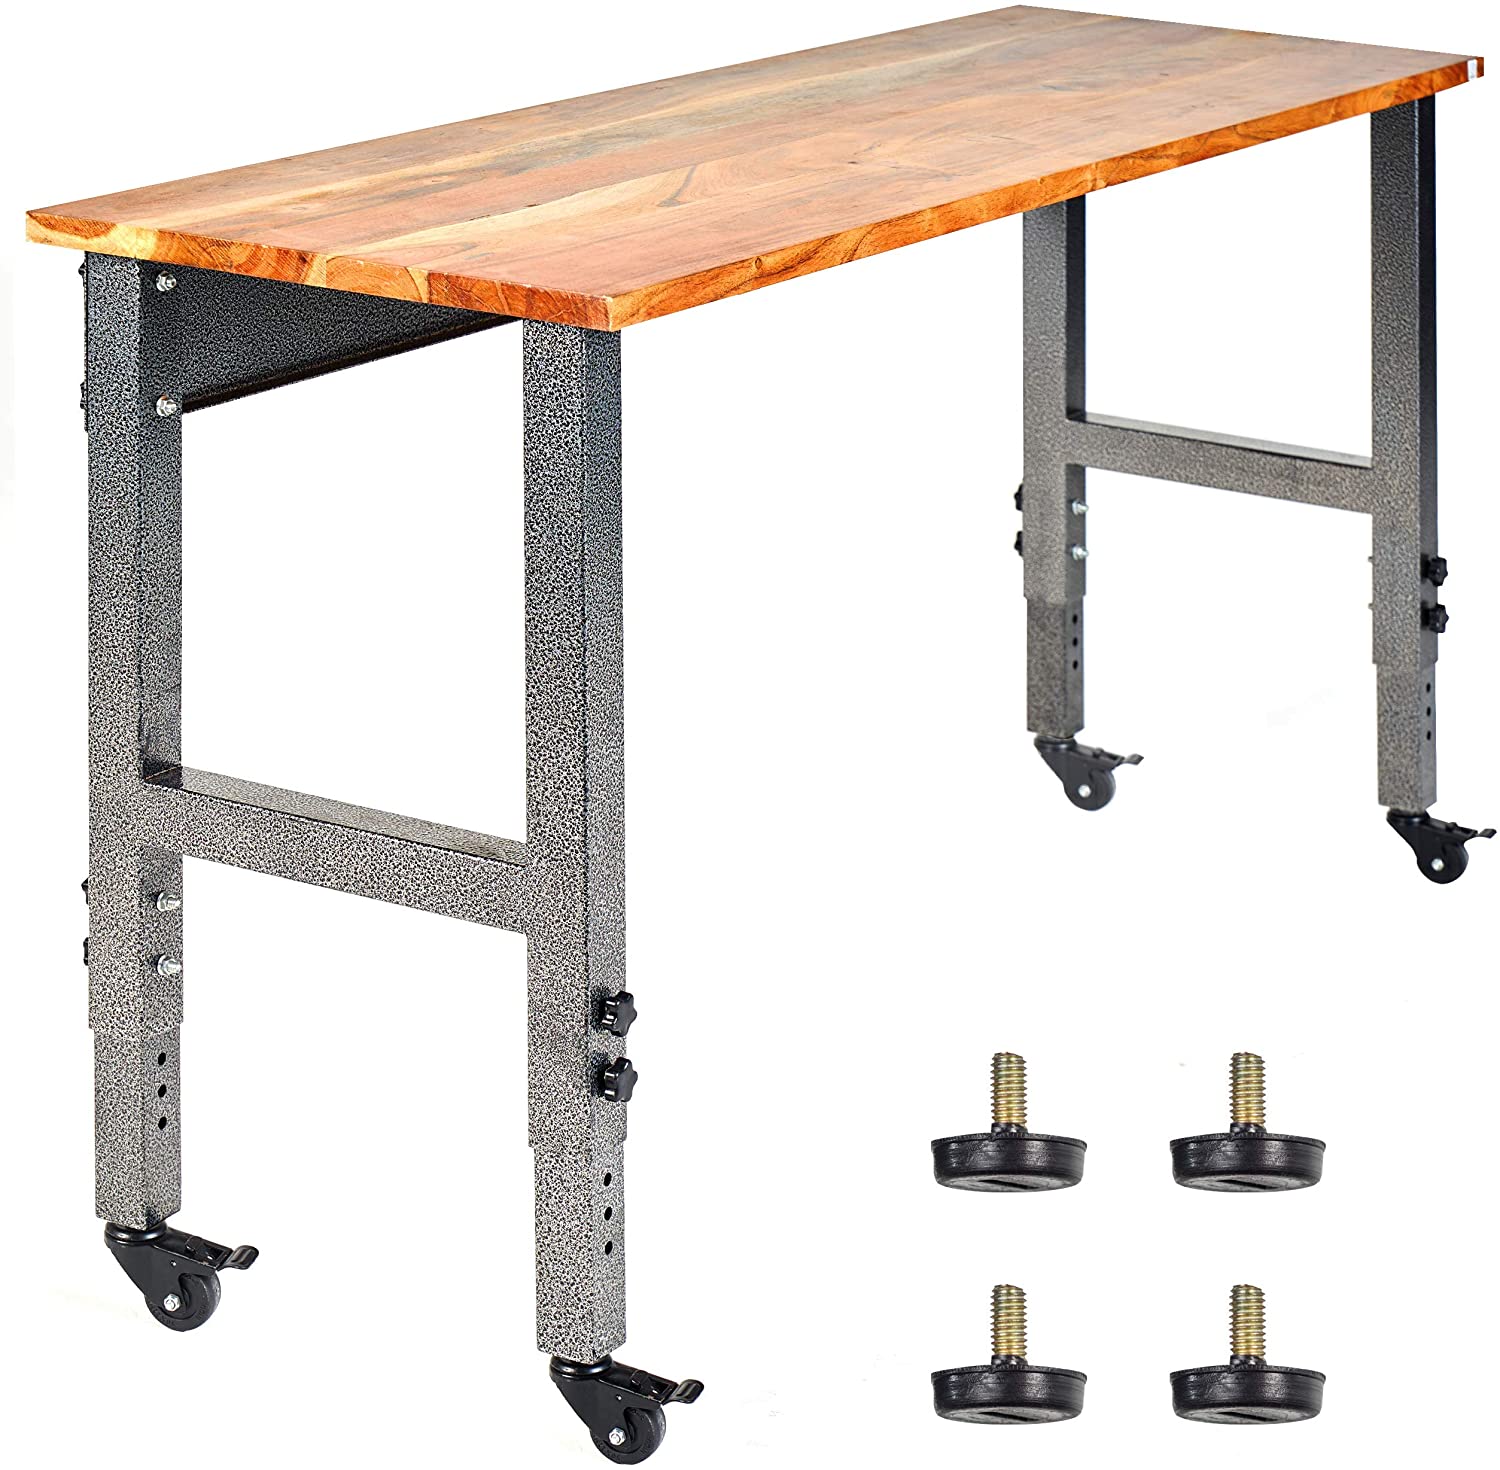 Mobile Garage Workbench by Fedmax